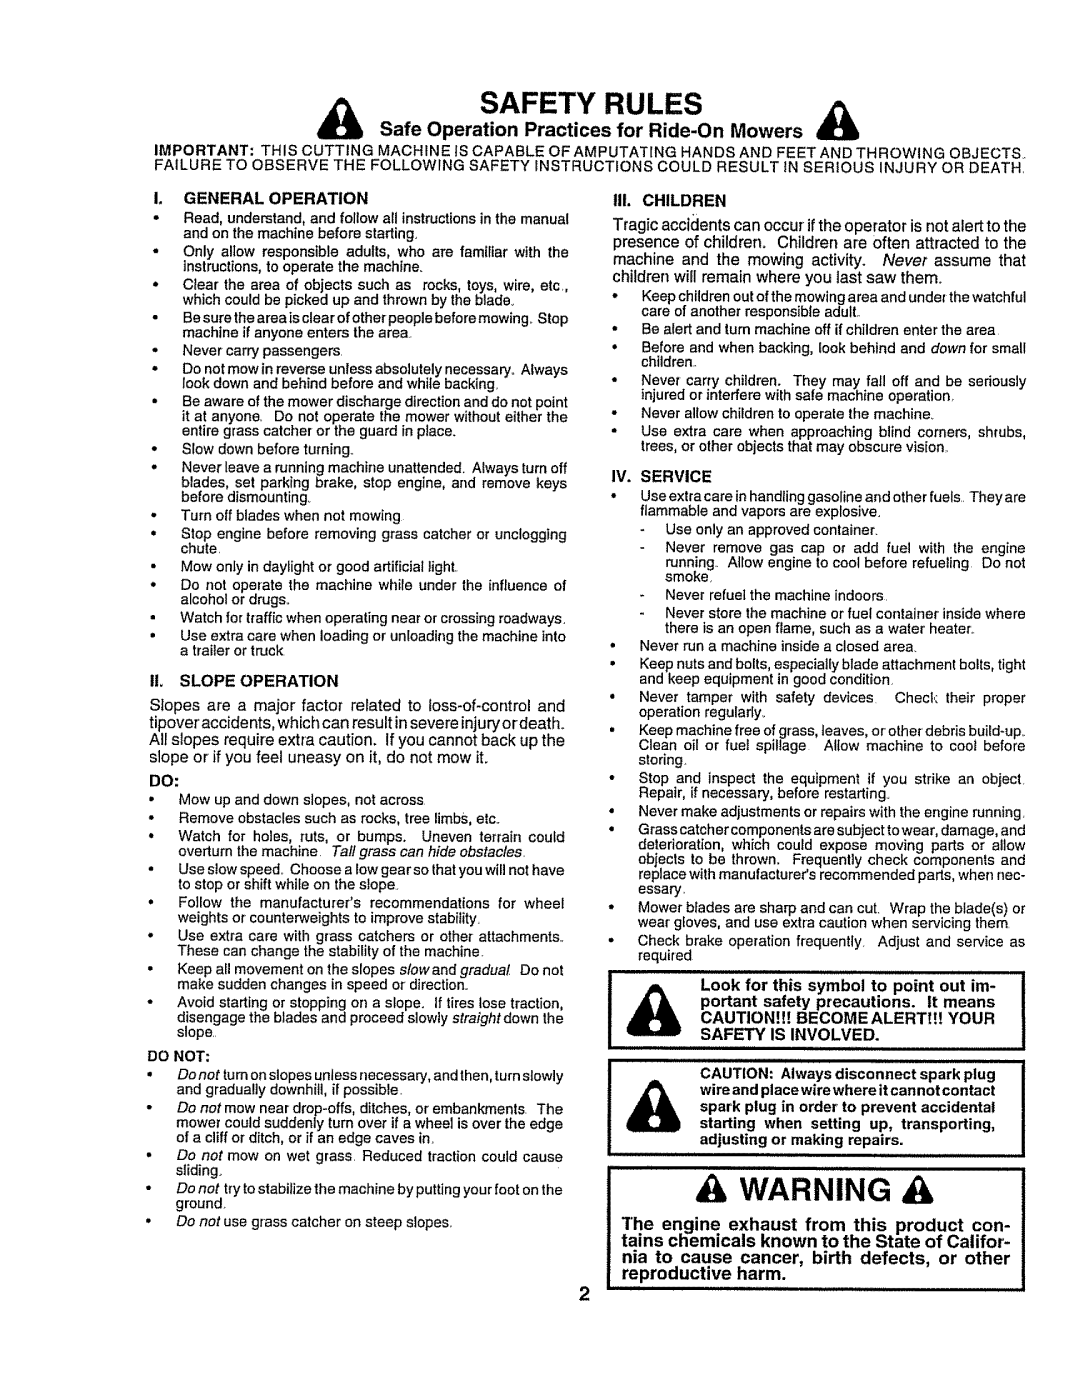 Craftsman 917O251550 Safety Rules, _it Safe Operation Practices for Ride-OnMowers, I1, SLOPE OPERATION, reprductive harm 